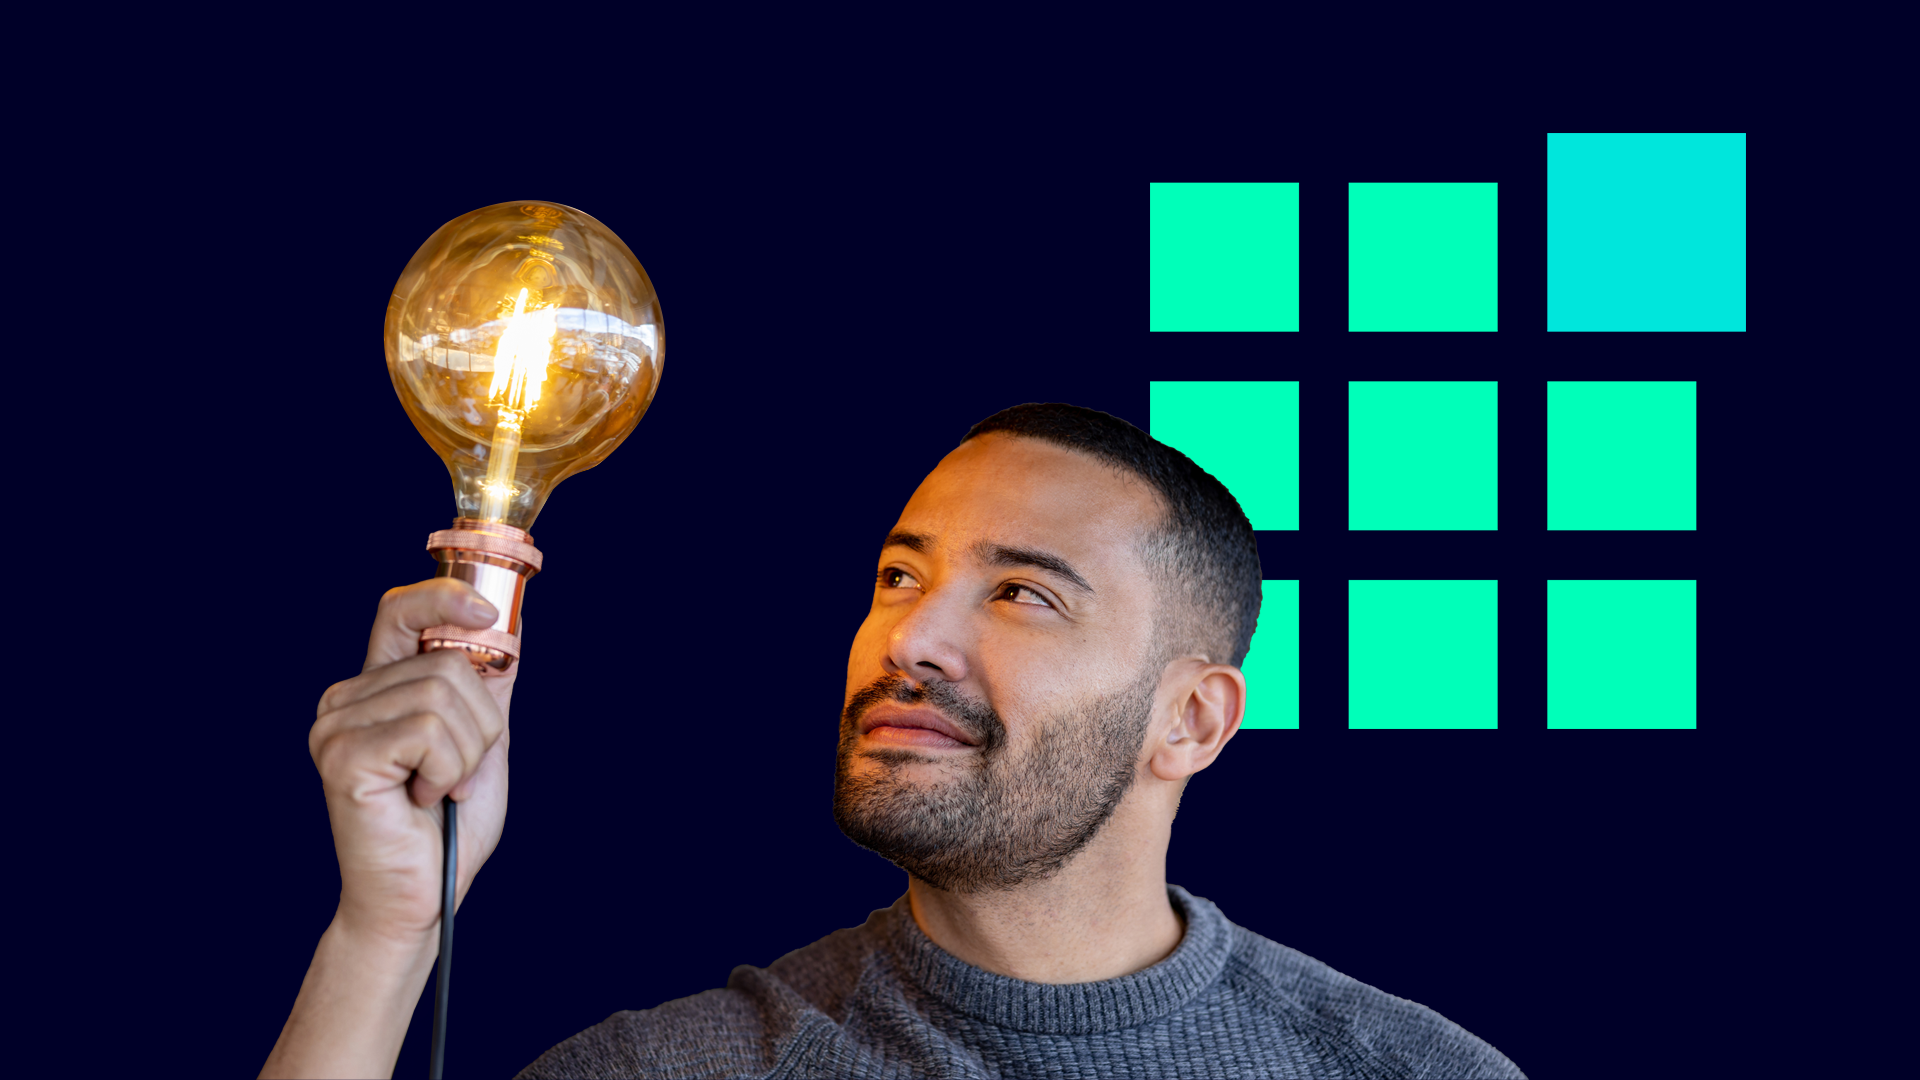 Man holding lit lightbulb up with 3x3 square patterned icon in background